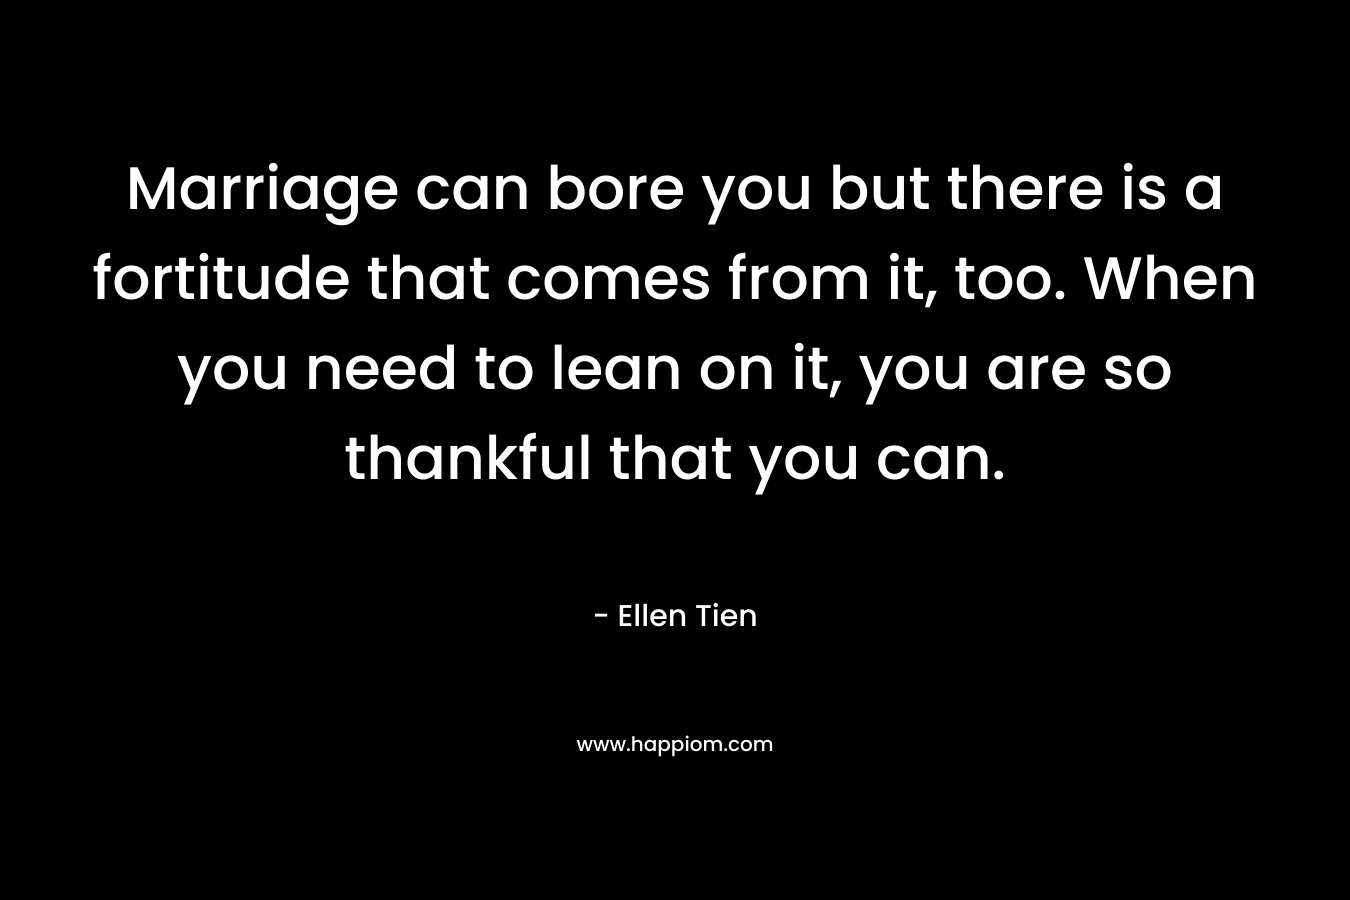 Marriage can bore you but there is a fortitude that comes from it, too. When you need to lean on it, you are so thankful that you can. – Ellen Tien